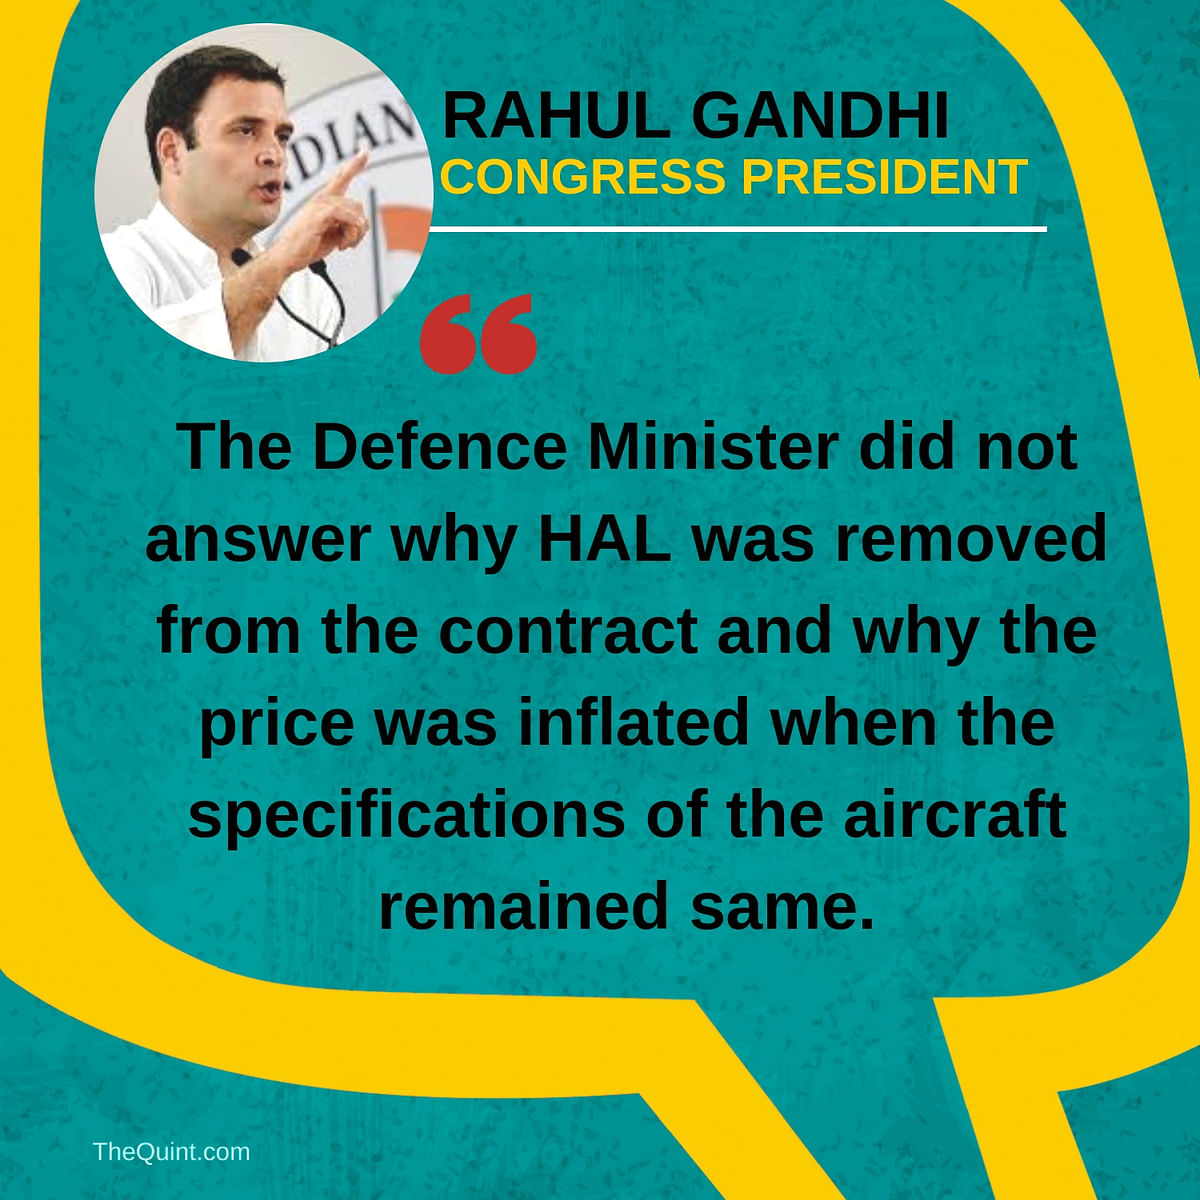 Here’s a recap of what went down during the Rafale debate between the Cong president and the defence minister in LS.